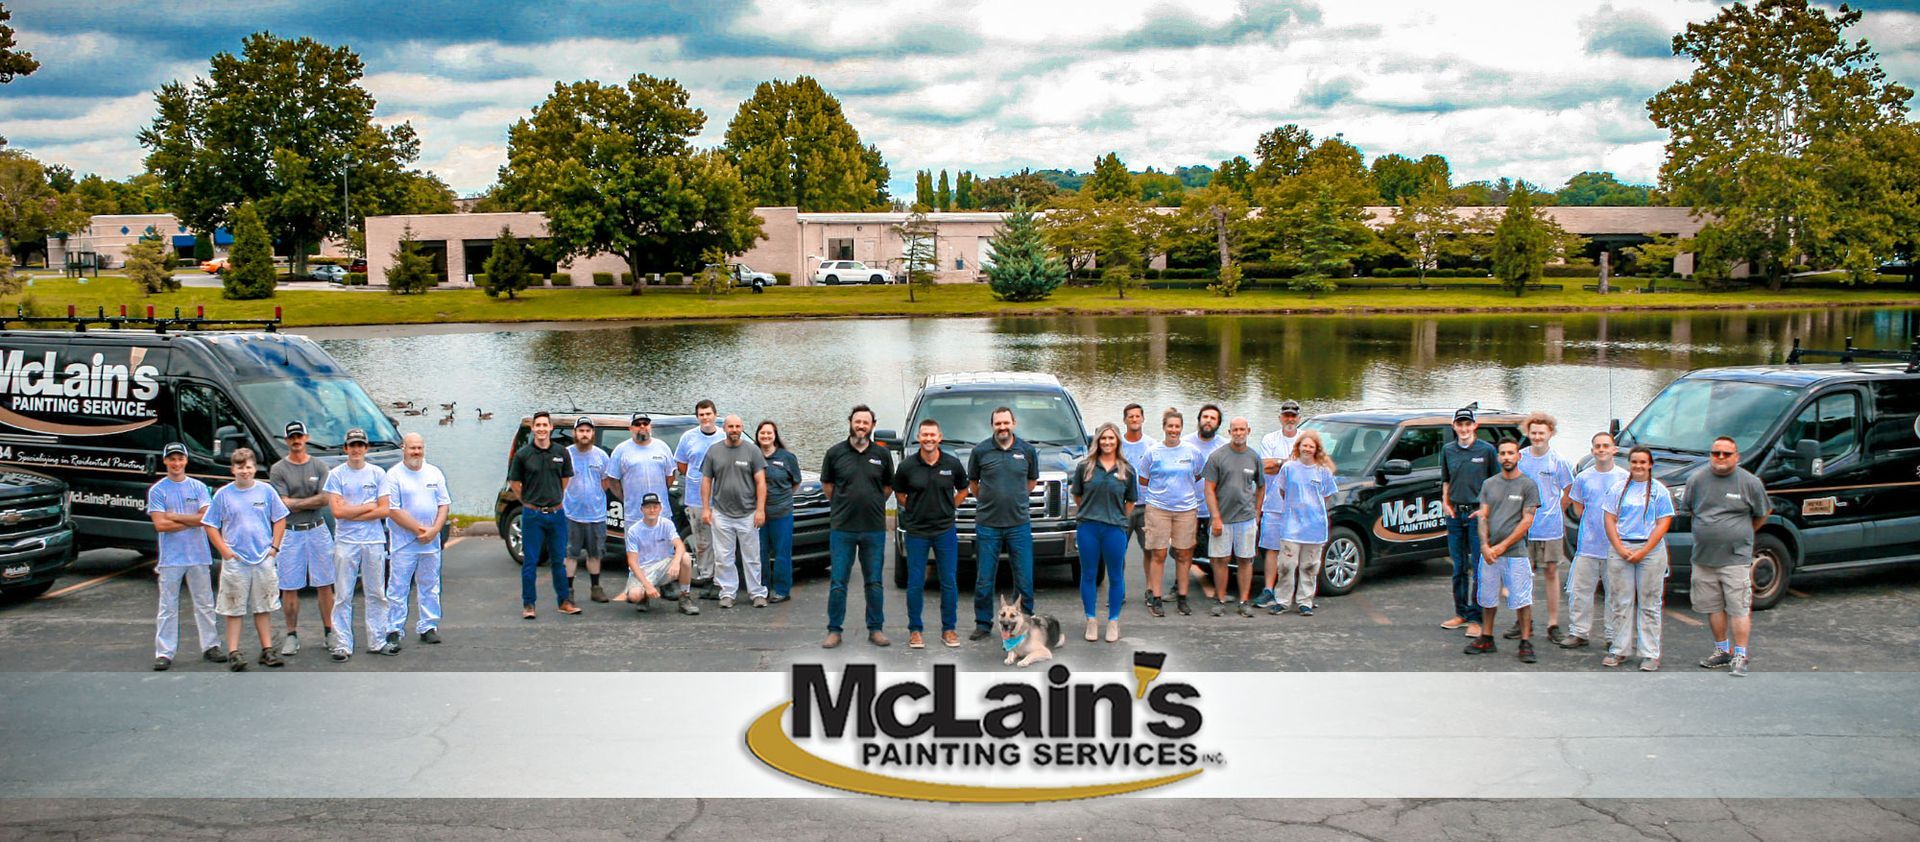 McLains Painting Services employee team photo